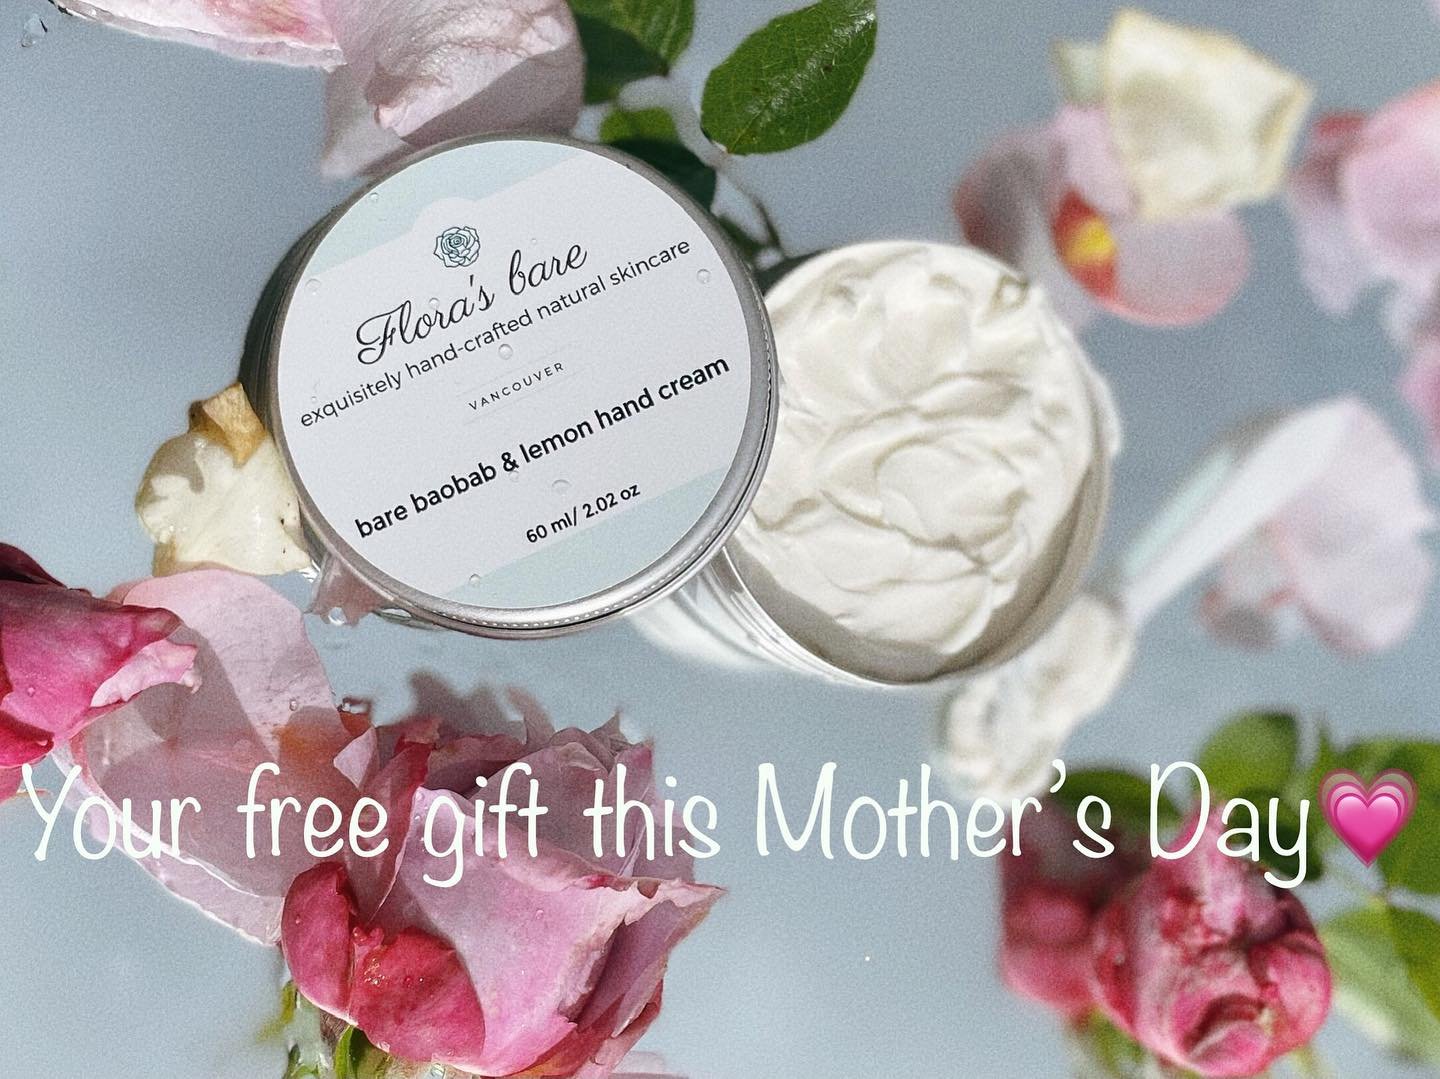 Thank your mother this year with the gift of award winning natural skincare and receive a complimentary bare baobab and lemon hand cream, valued at $24,&nbsp;when you purchase any&nbsp;2&nbsp;products from our range.*

www.florasbare.com
www.florasba